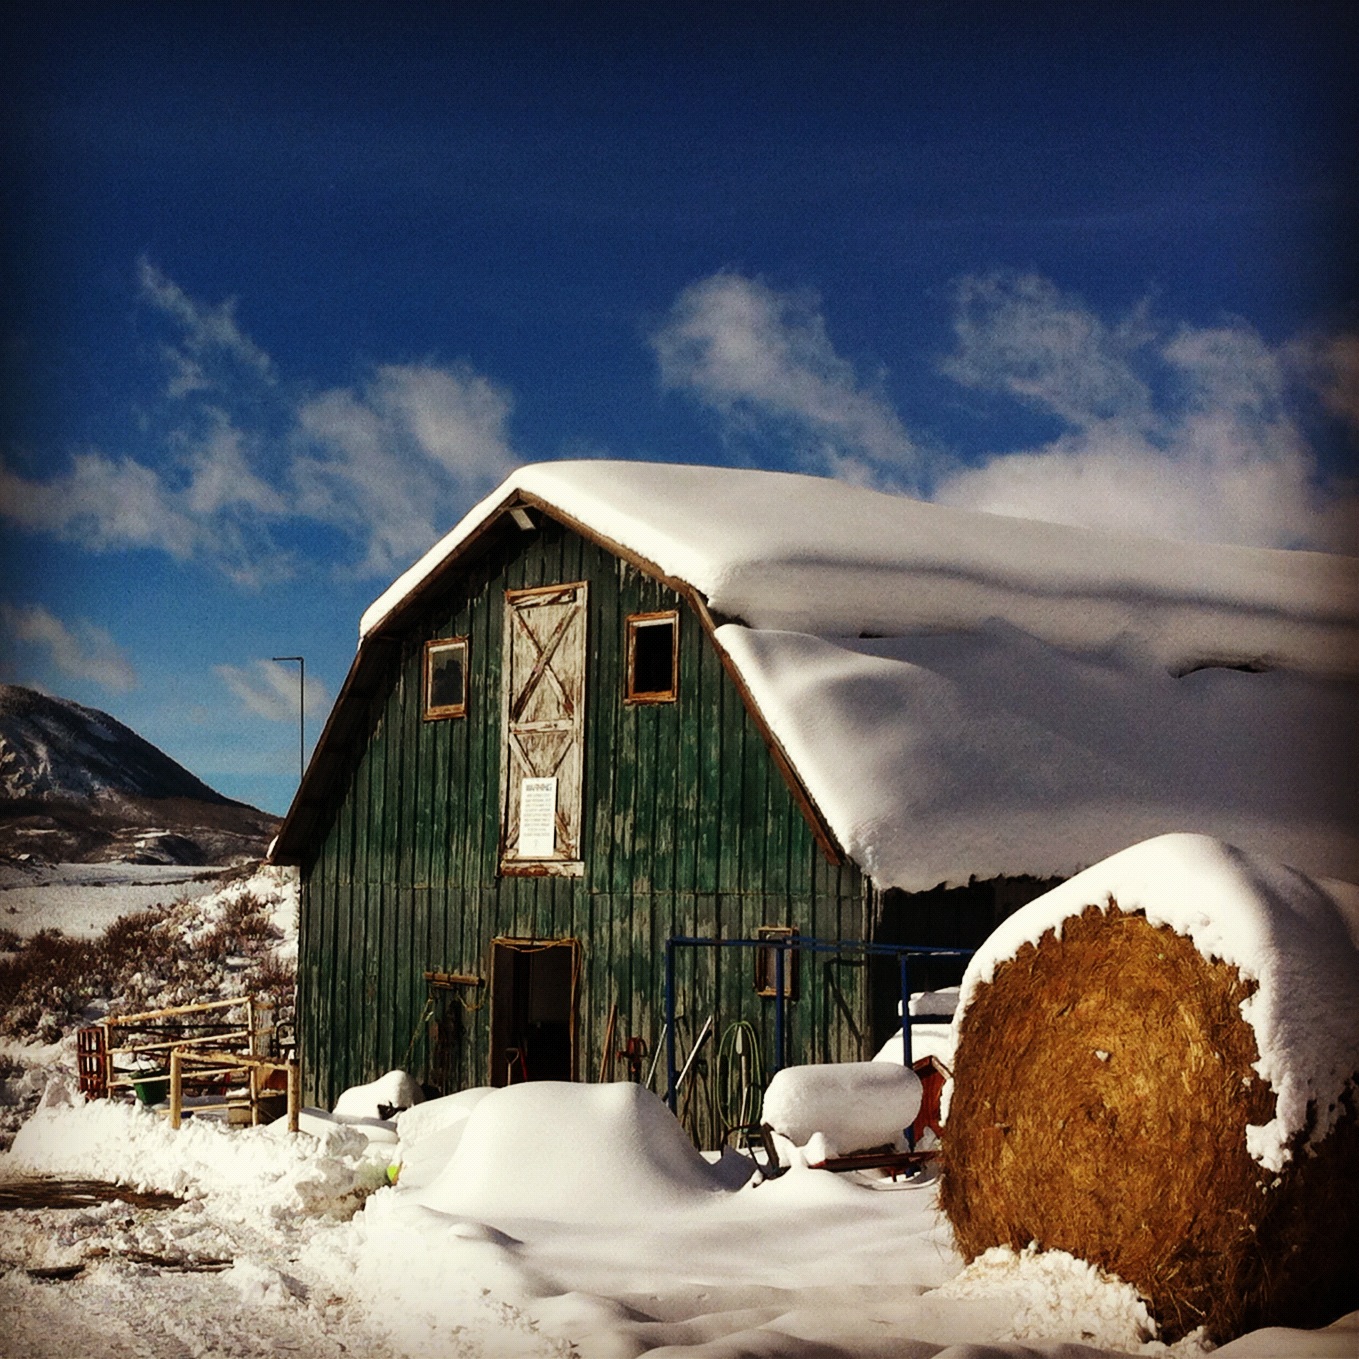 Fresh Snow & Equestrian Findings From Steamboat Springs, Colorado